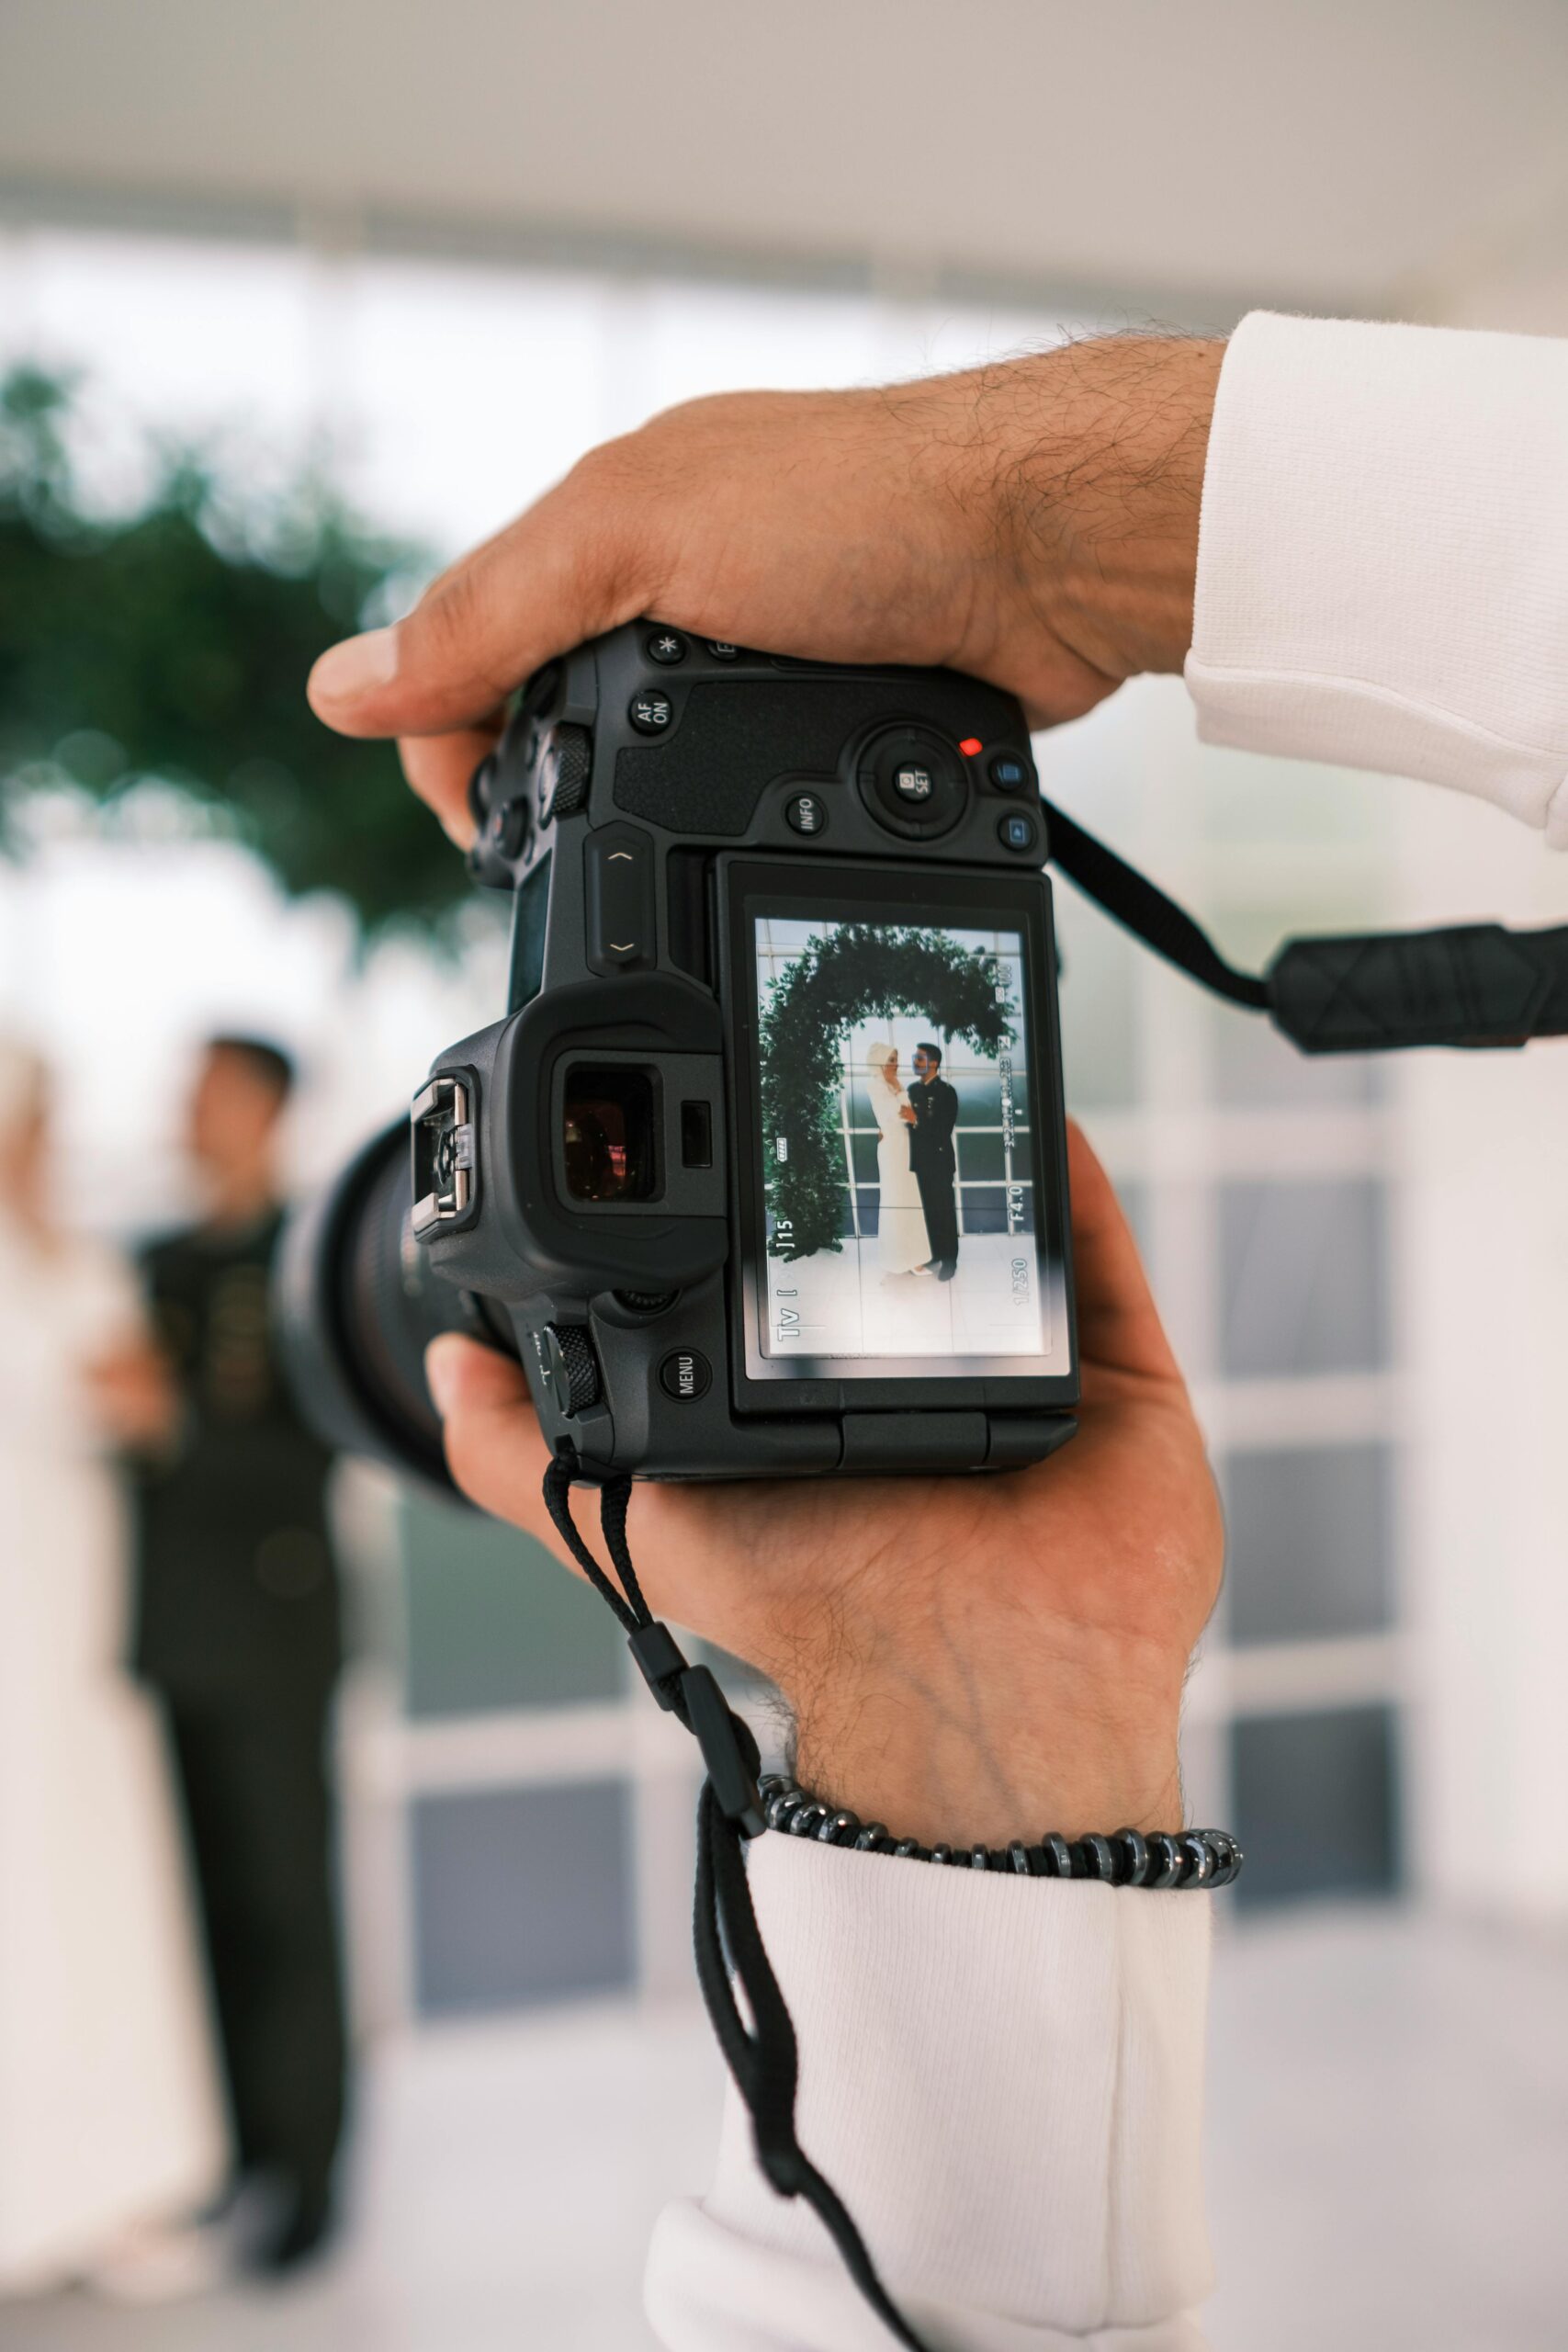 Closeup photo of a wedding photographer's viewfinder on their camera